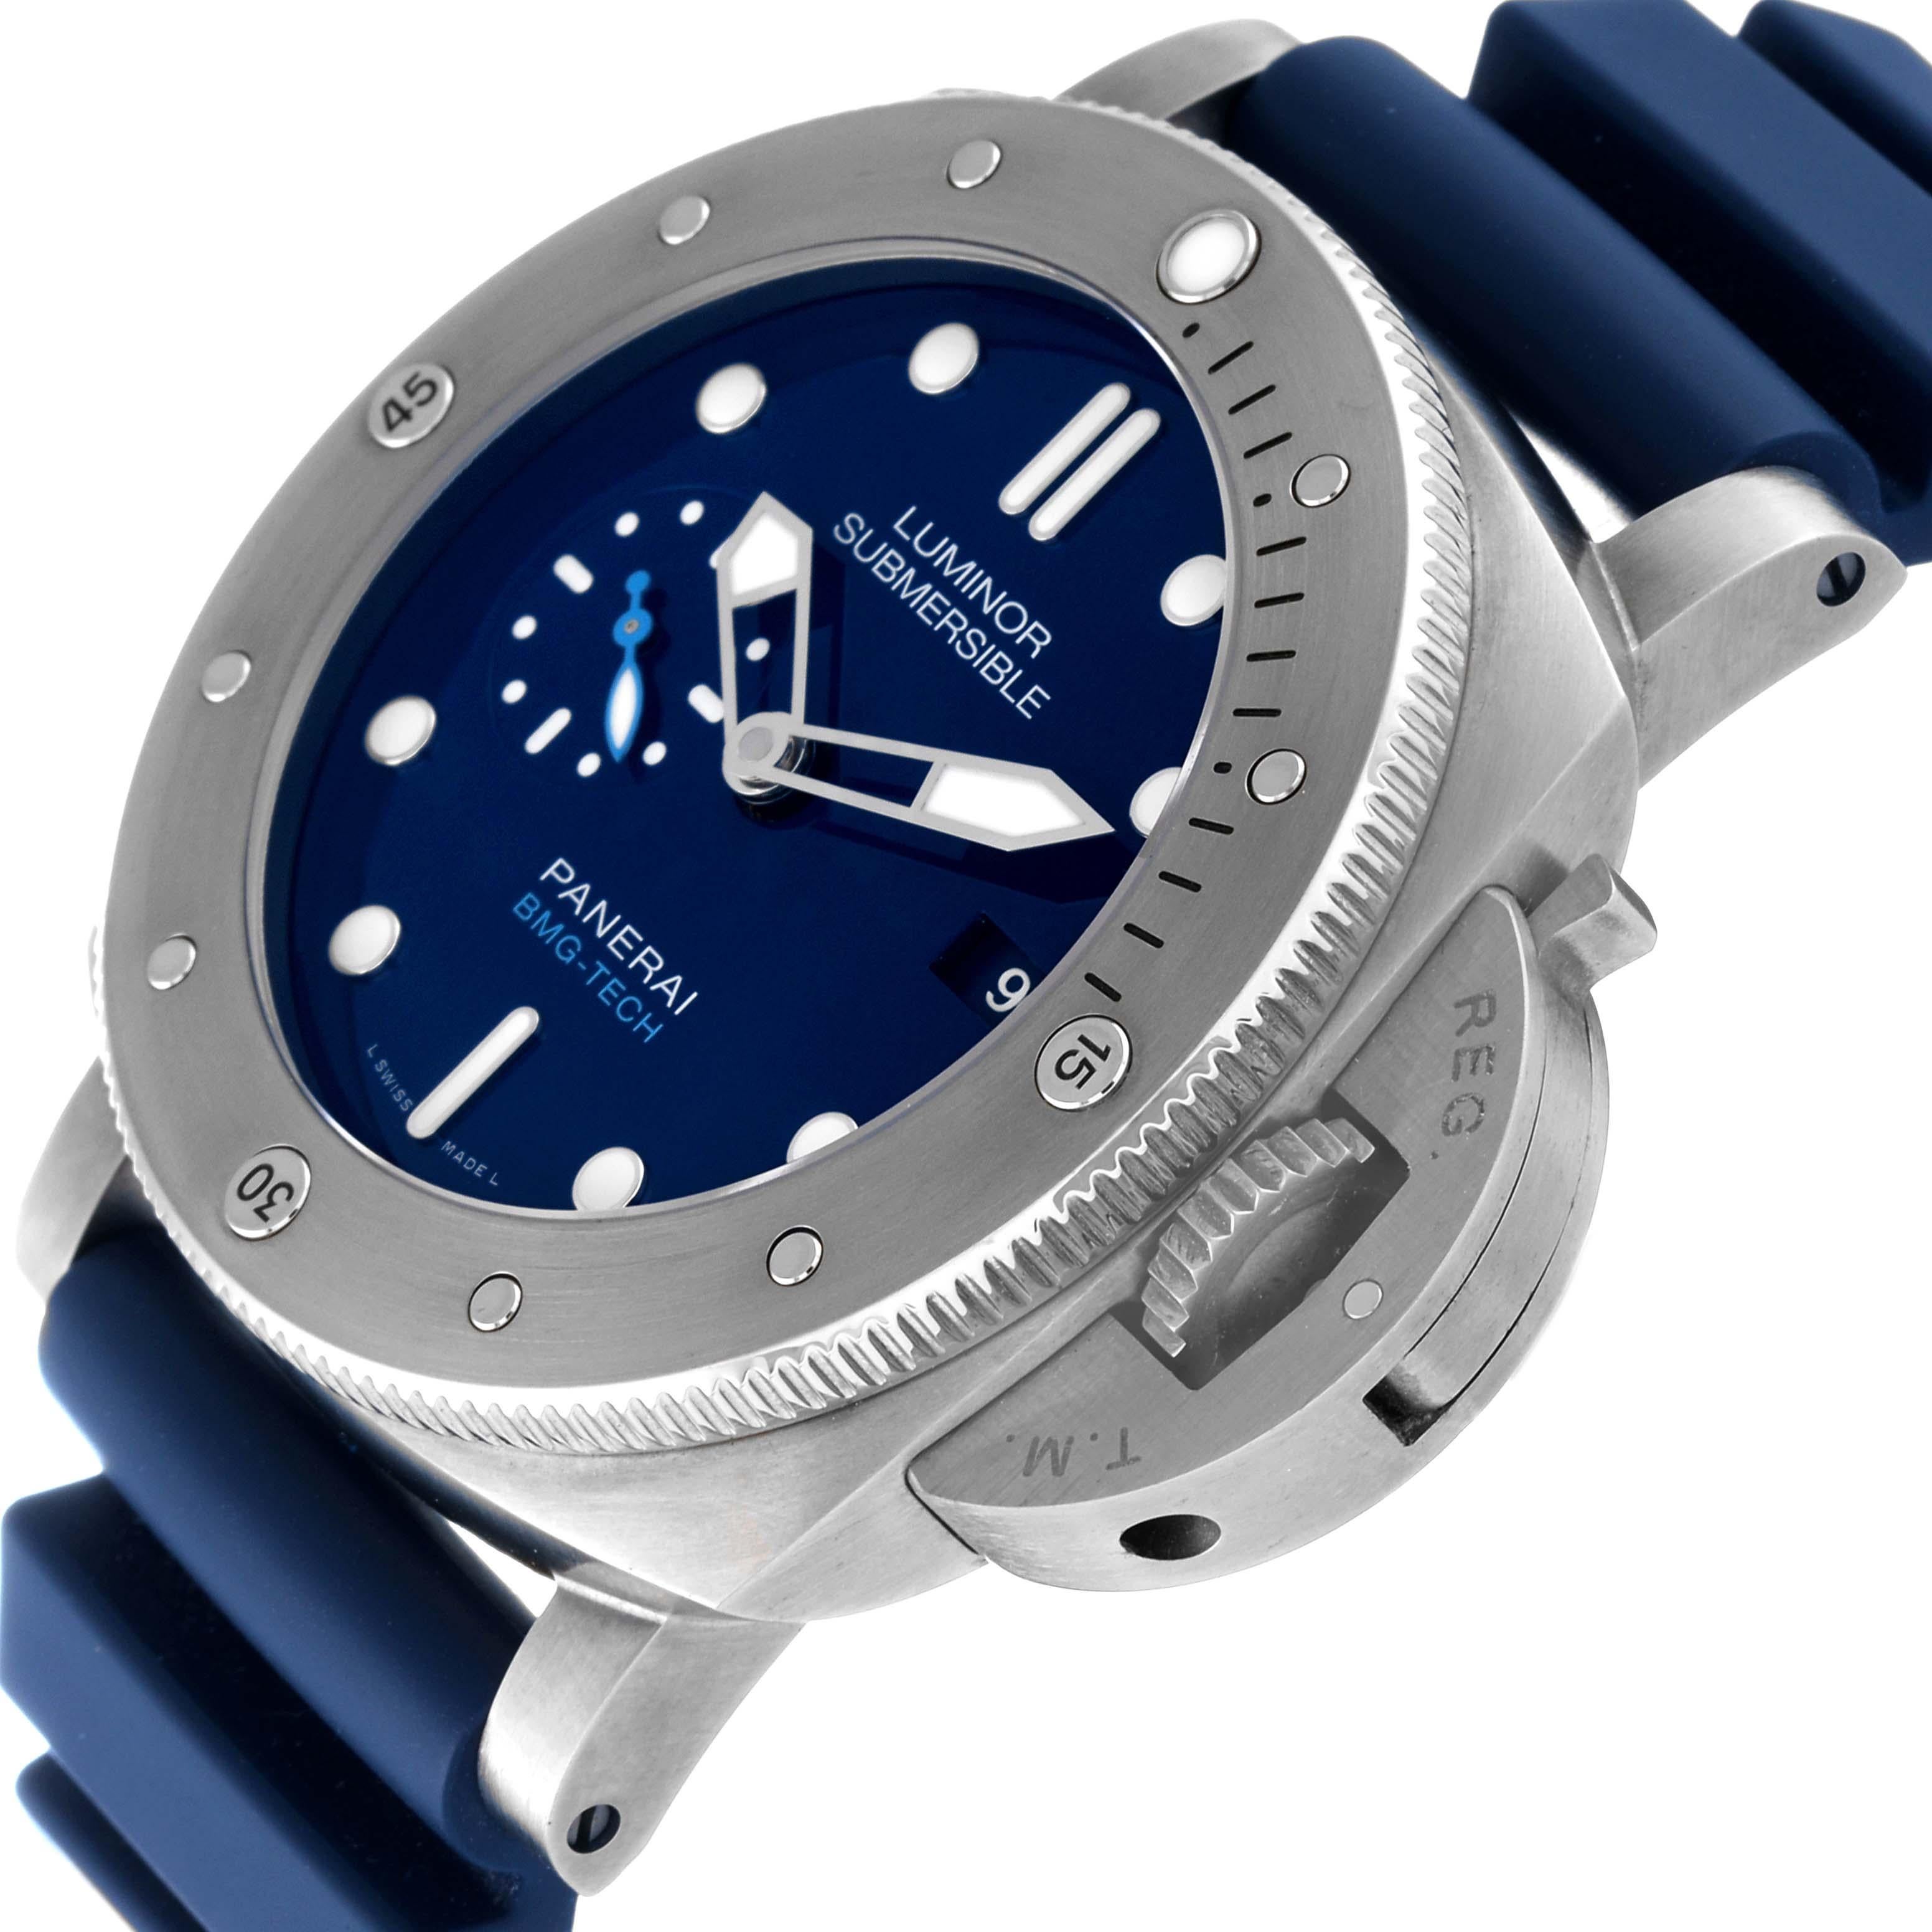 Panerai Submersible BMG-TECH Blue Dial Mens Watch PAM00692 Box Papers 2